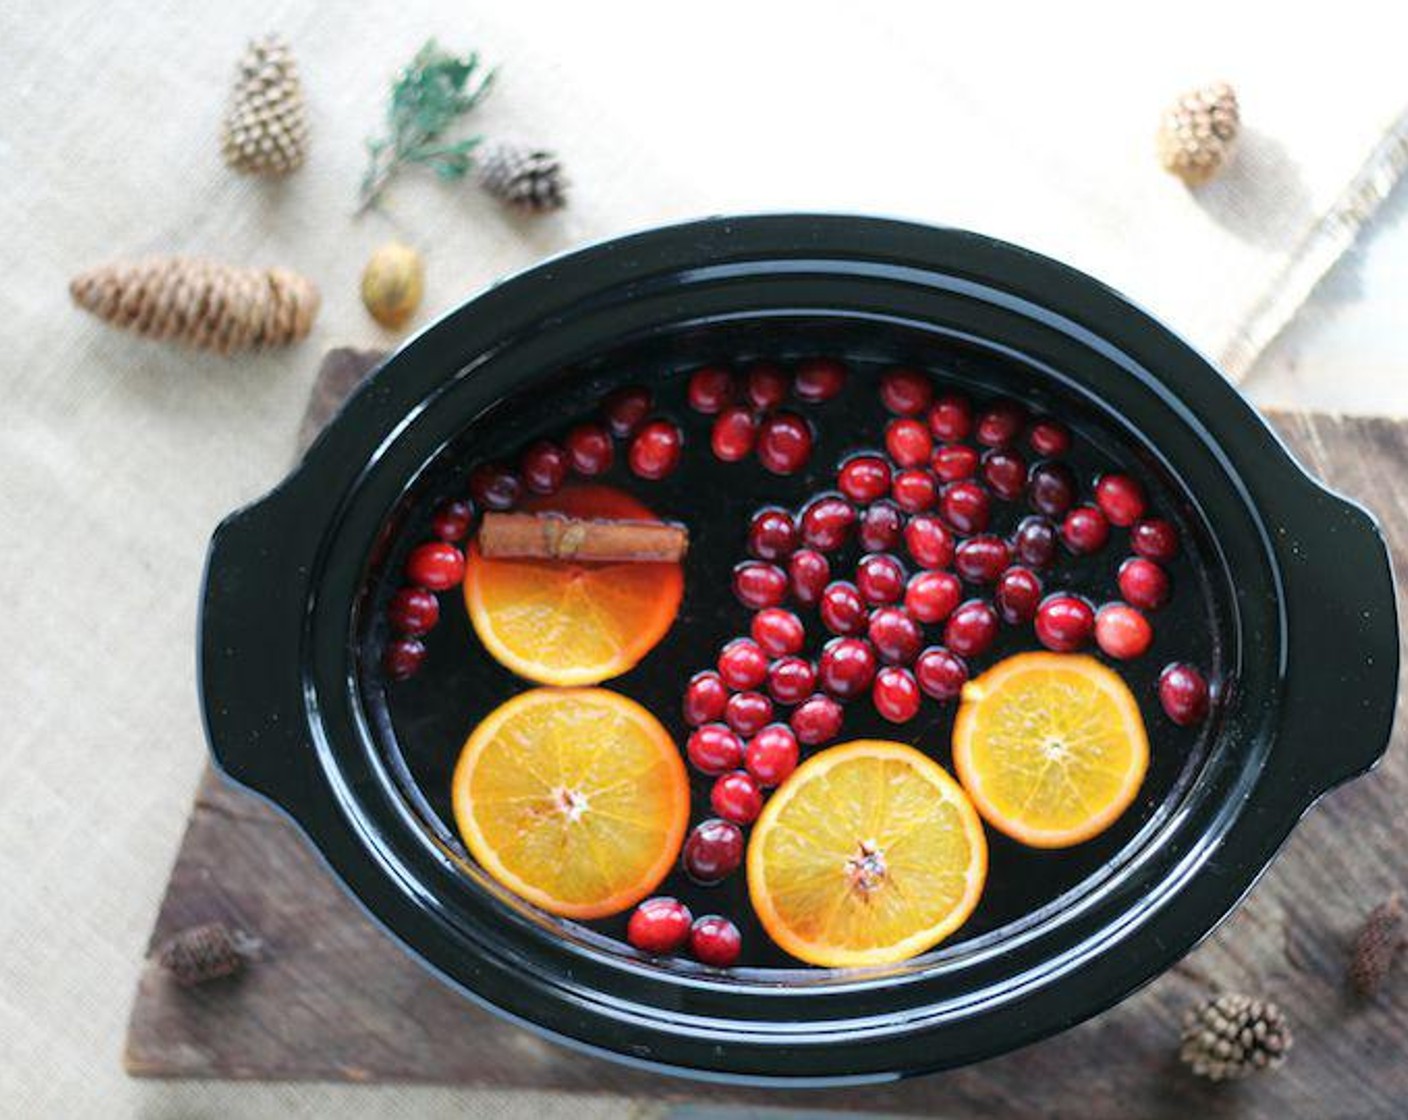 step 1 Pour the Cranberry Juice (8 cups), Apple Cider (8 cups) and Red Hots® Cinnamon Candy (1 cup) into a large crockpot. Heat on high, stirring often to dissolve the candies.